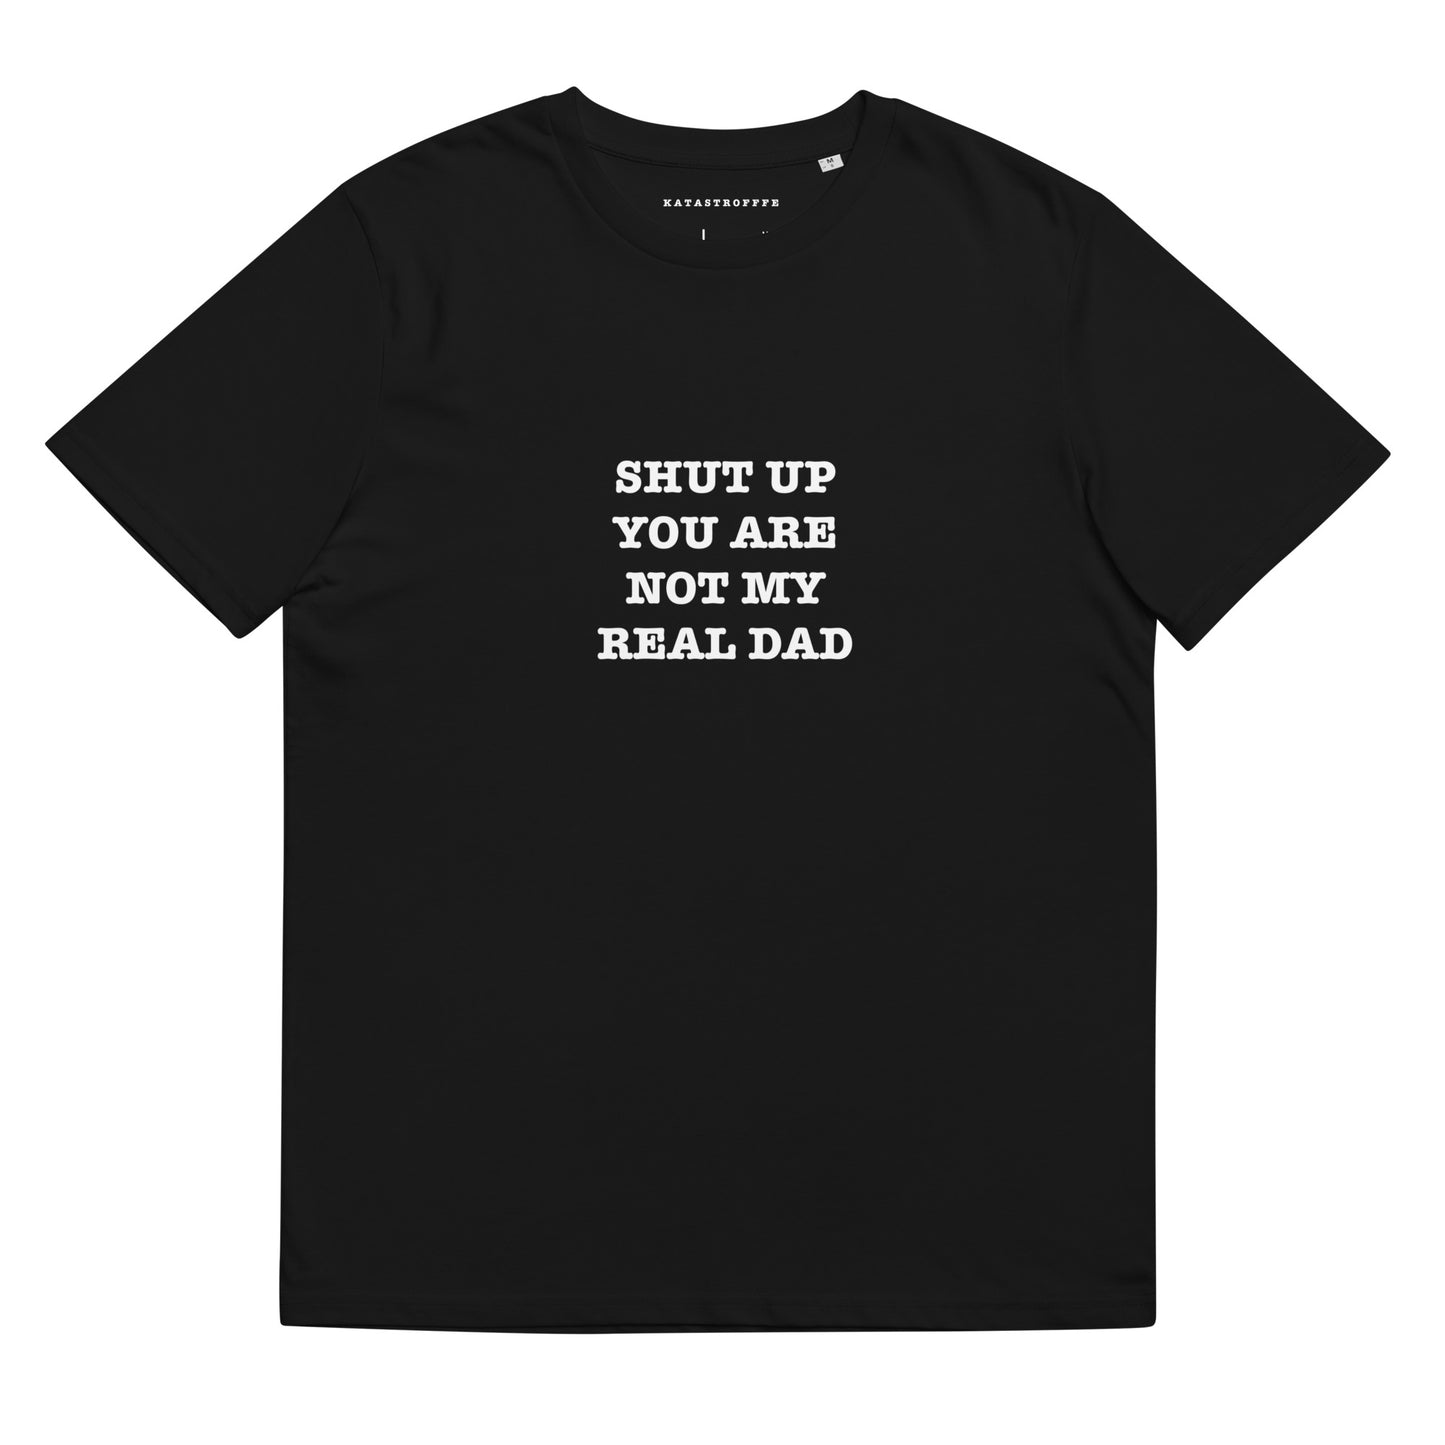 SHUT UP YOU ARE NOT MY REAL DAD Katastrofffe Unisex organic cotton t-shirt